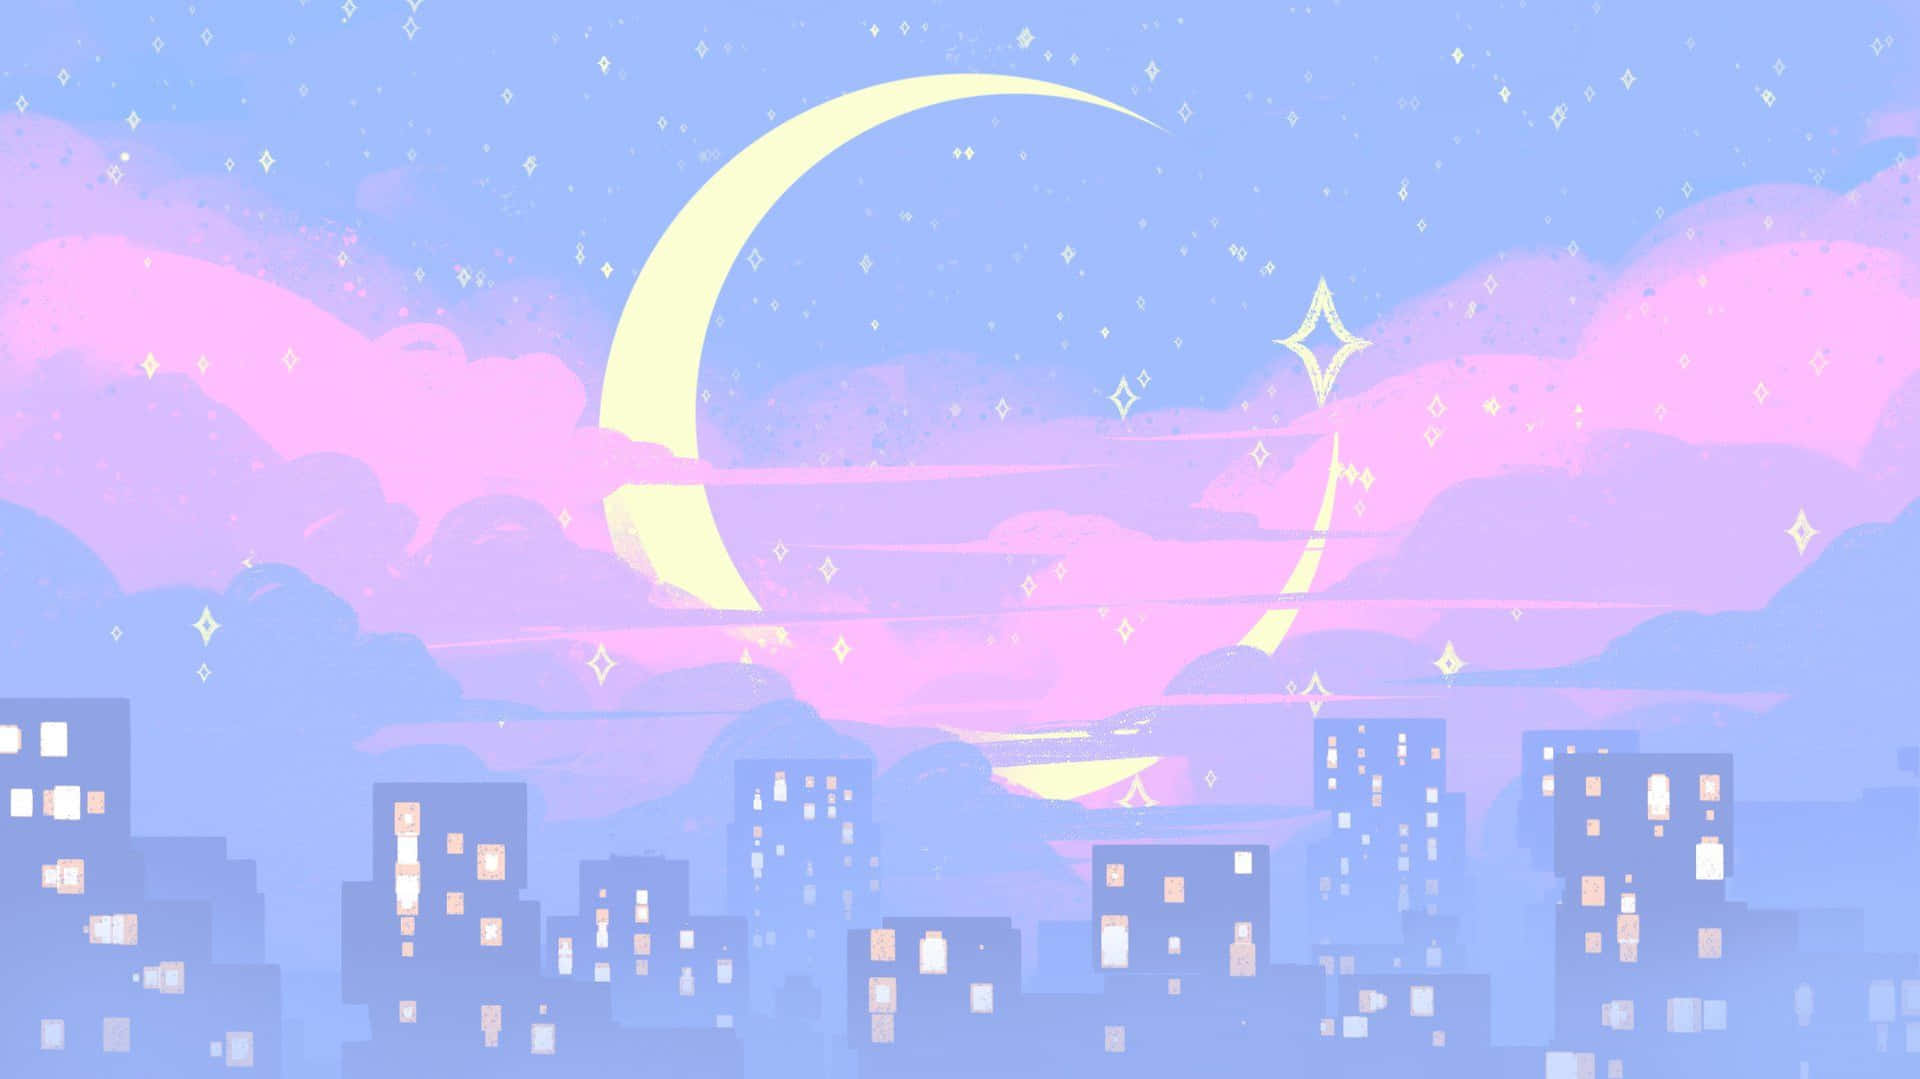 Explore the Adorable Universe with Kawaii Space Wallpaper